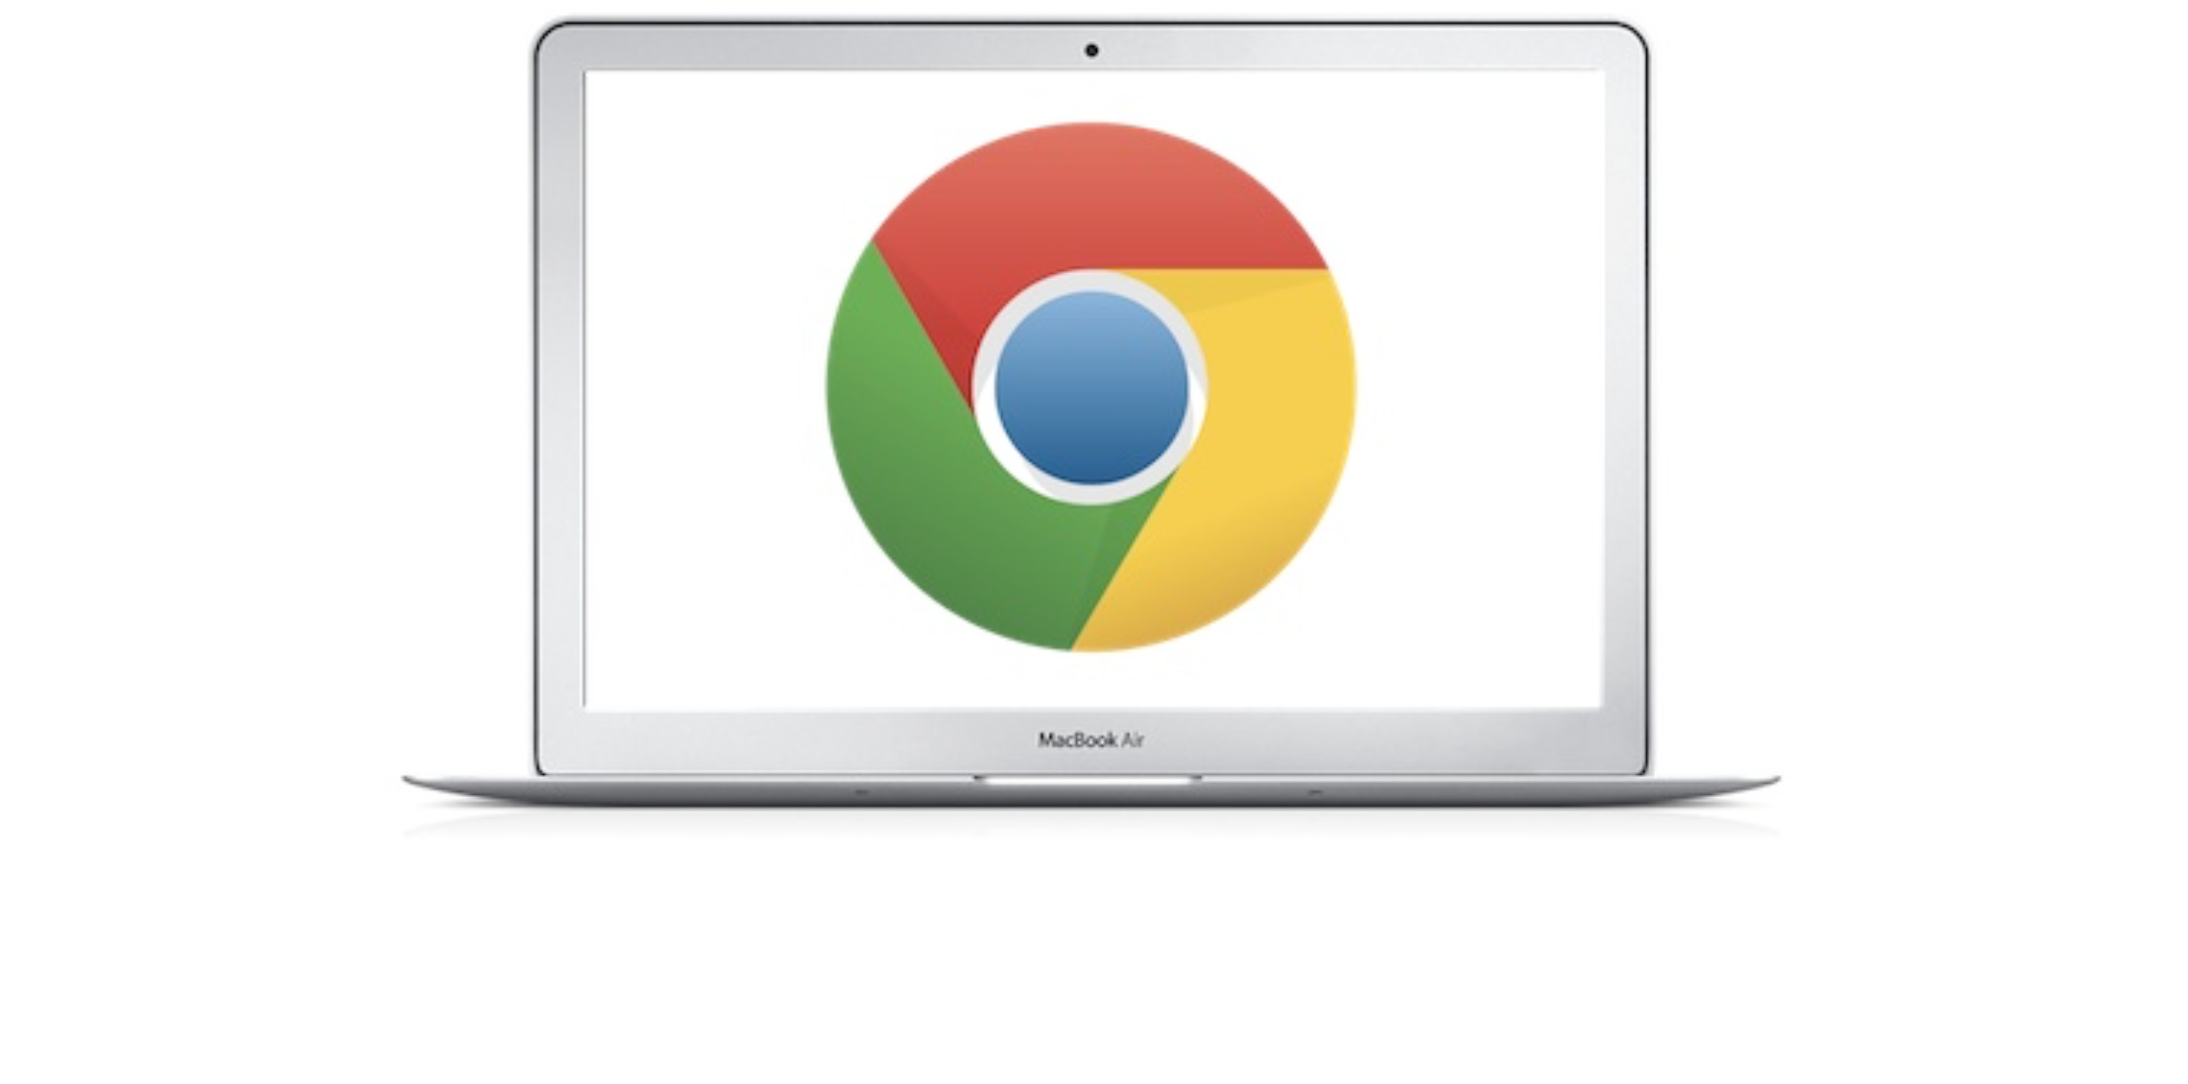 Google Chrome 114.0.5735.199 for ipod download